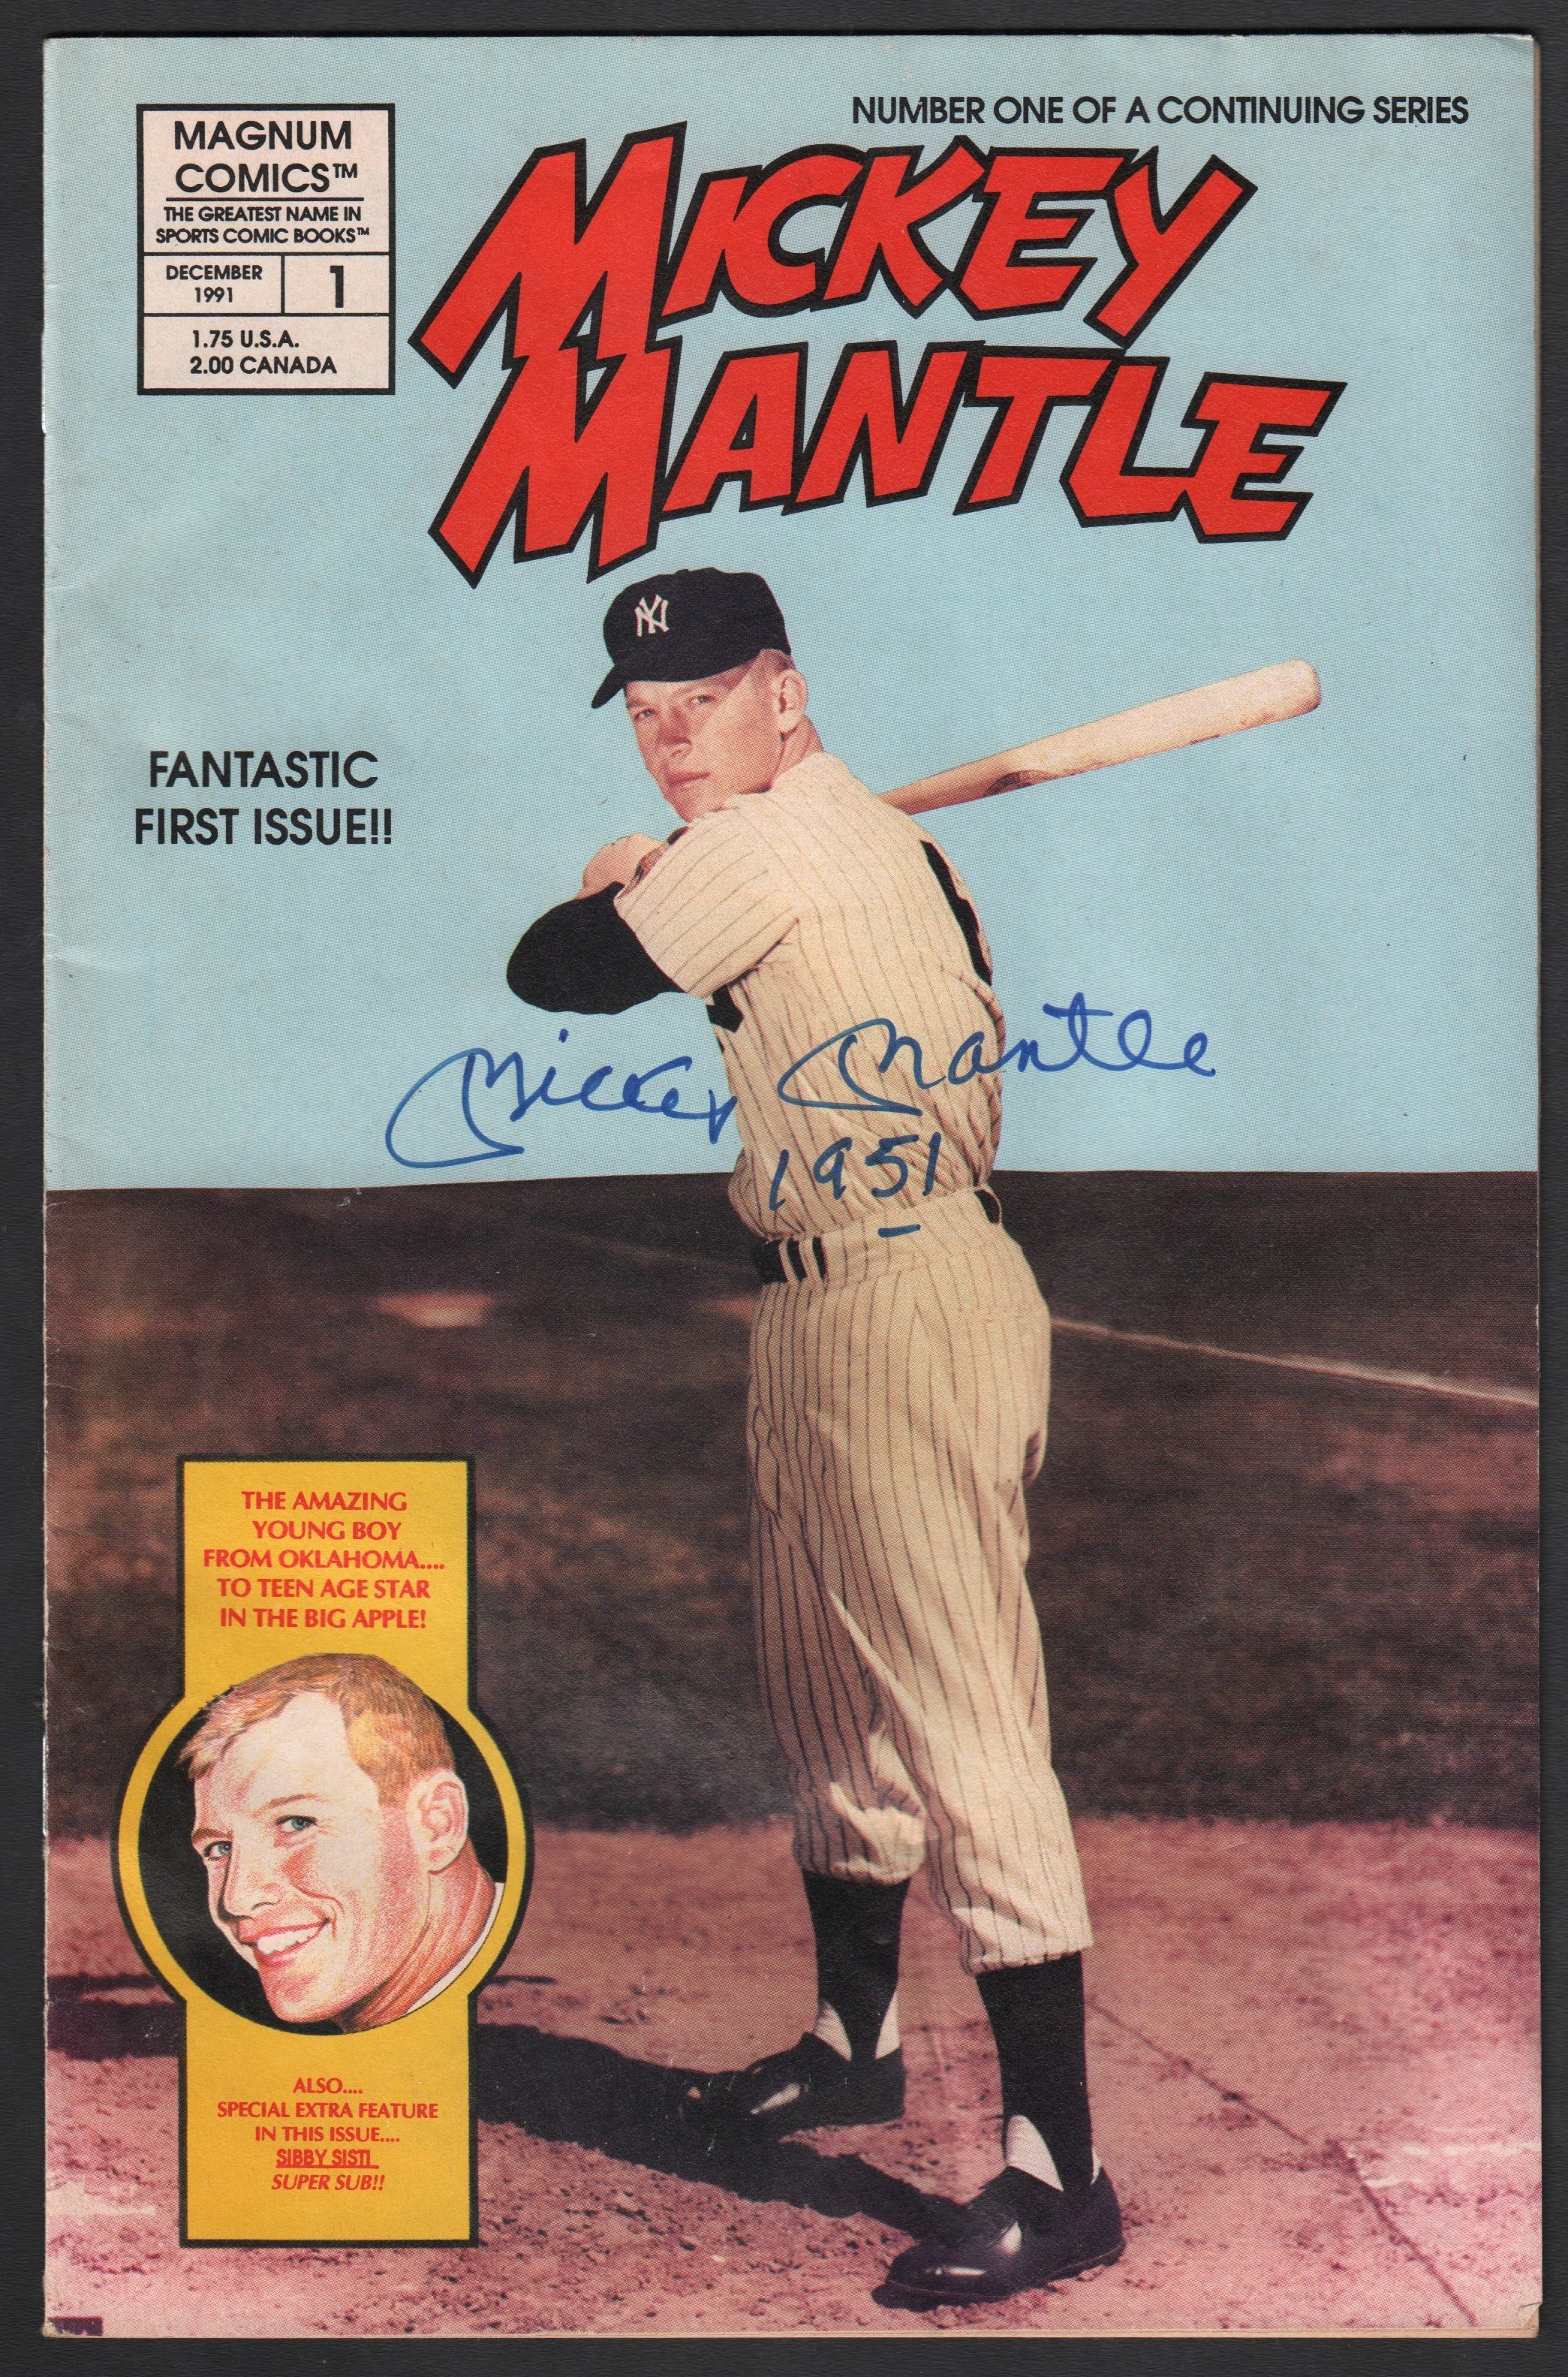 Baseball Autographs - 1991 Mickey Mantle "1951" Signed Comic Book